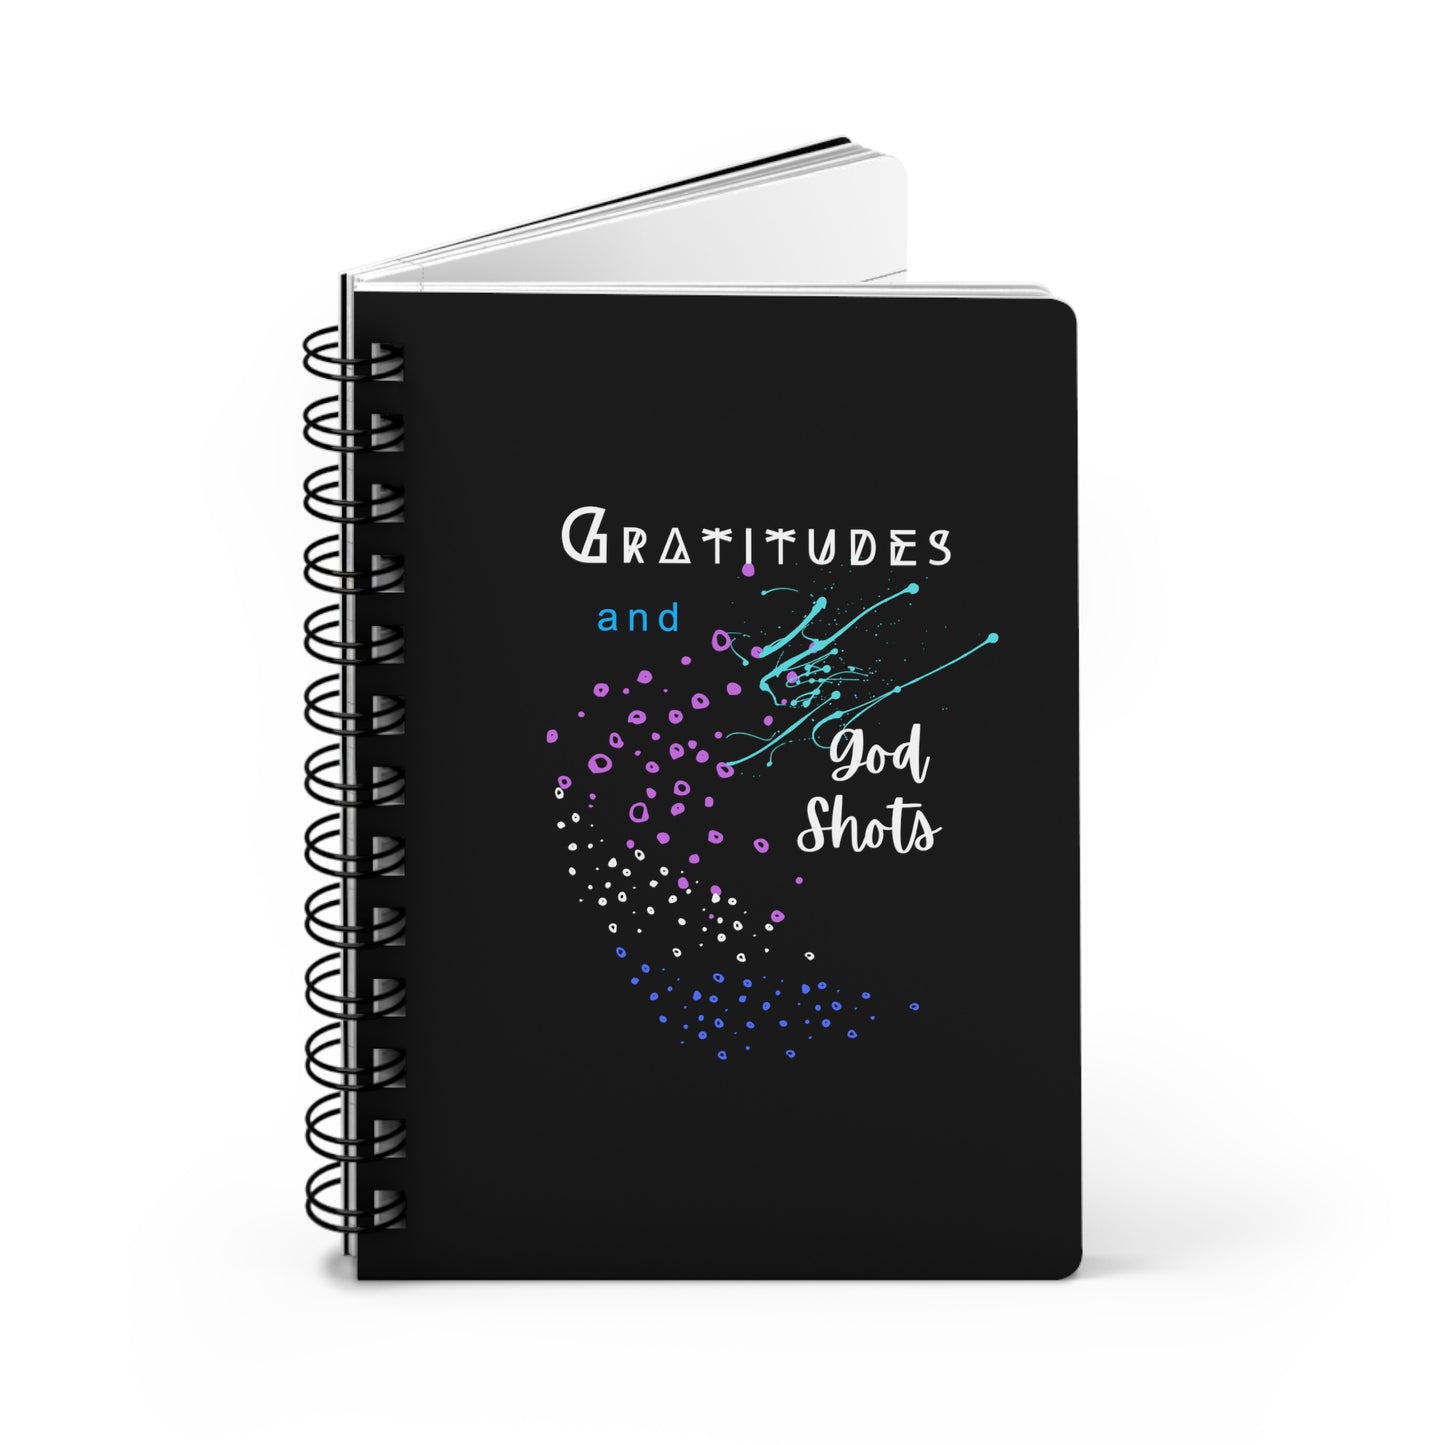 "Gratitude's and God Shots" Recovery Journal